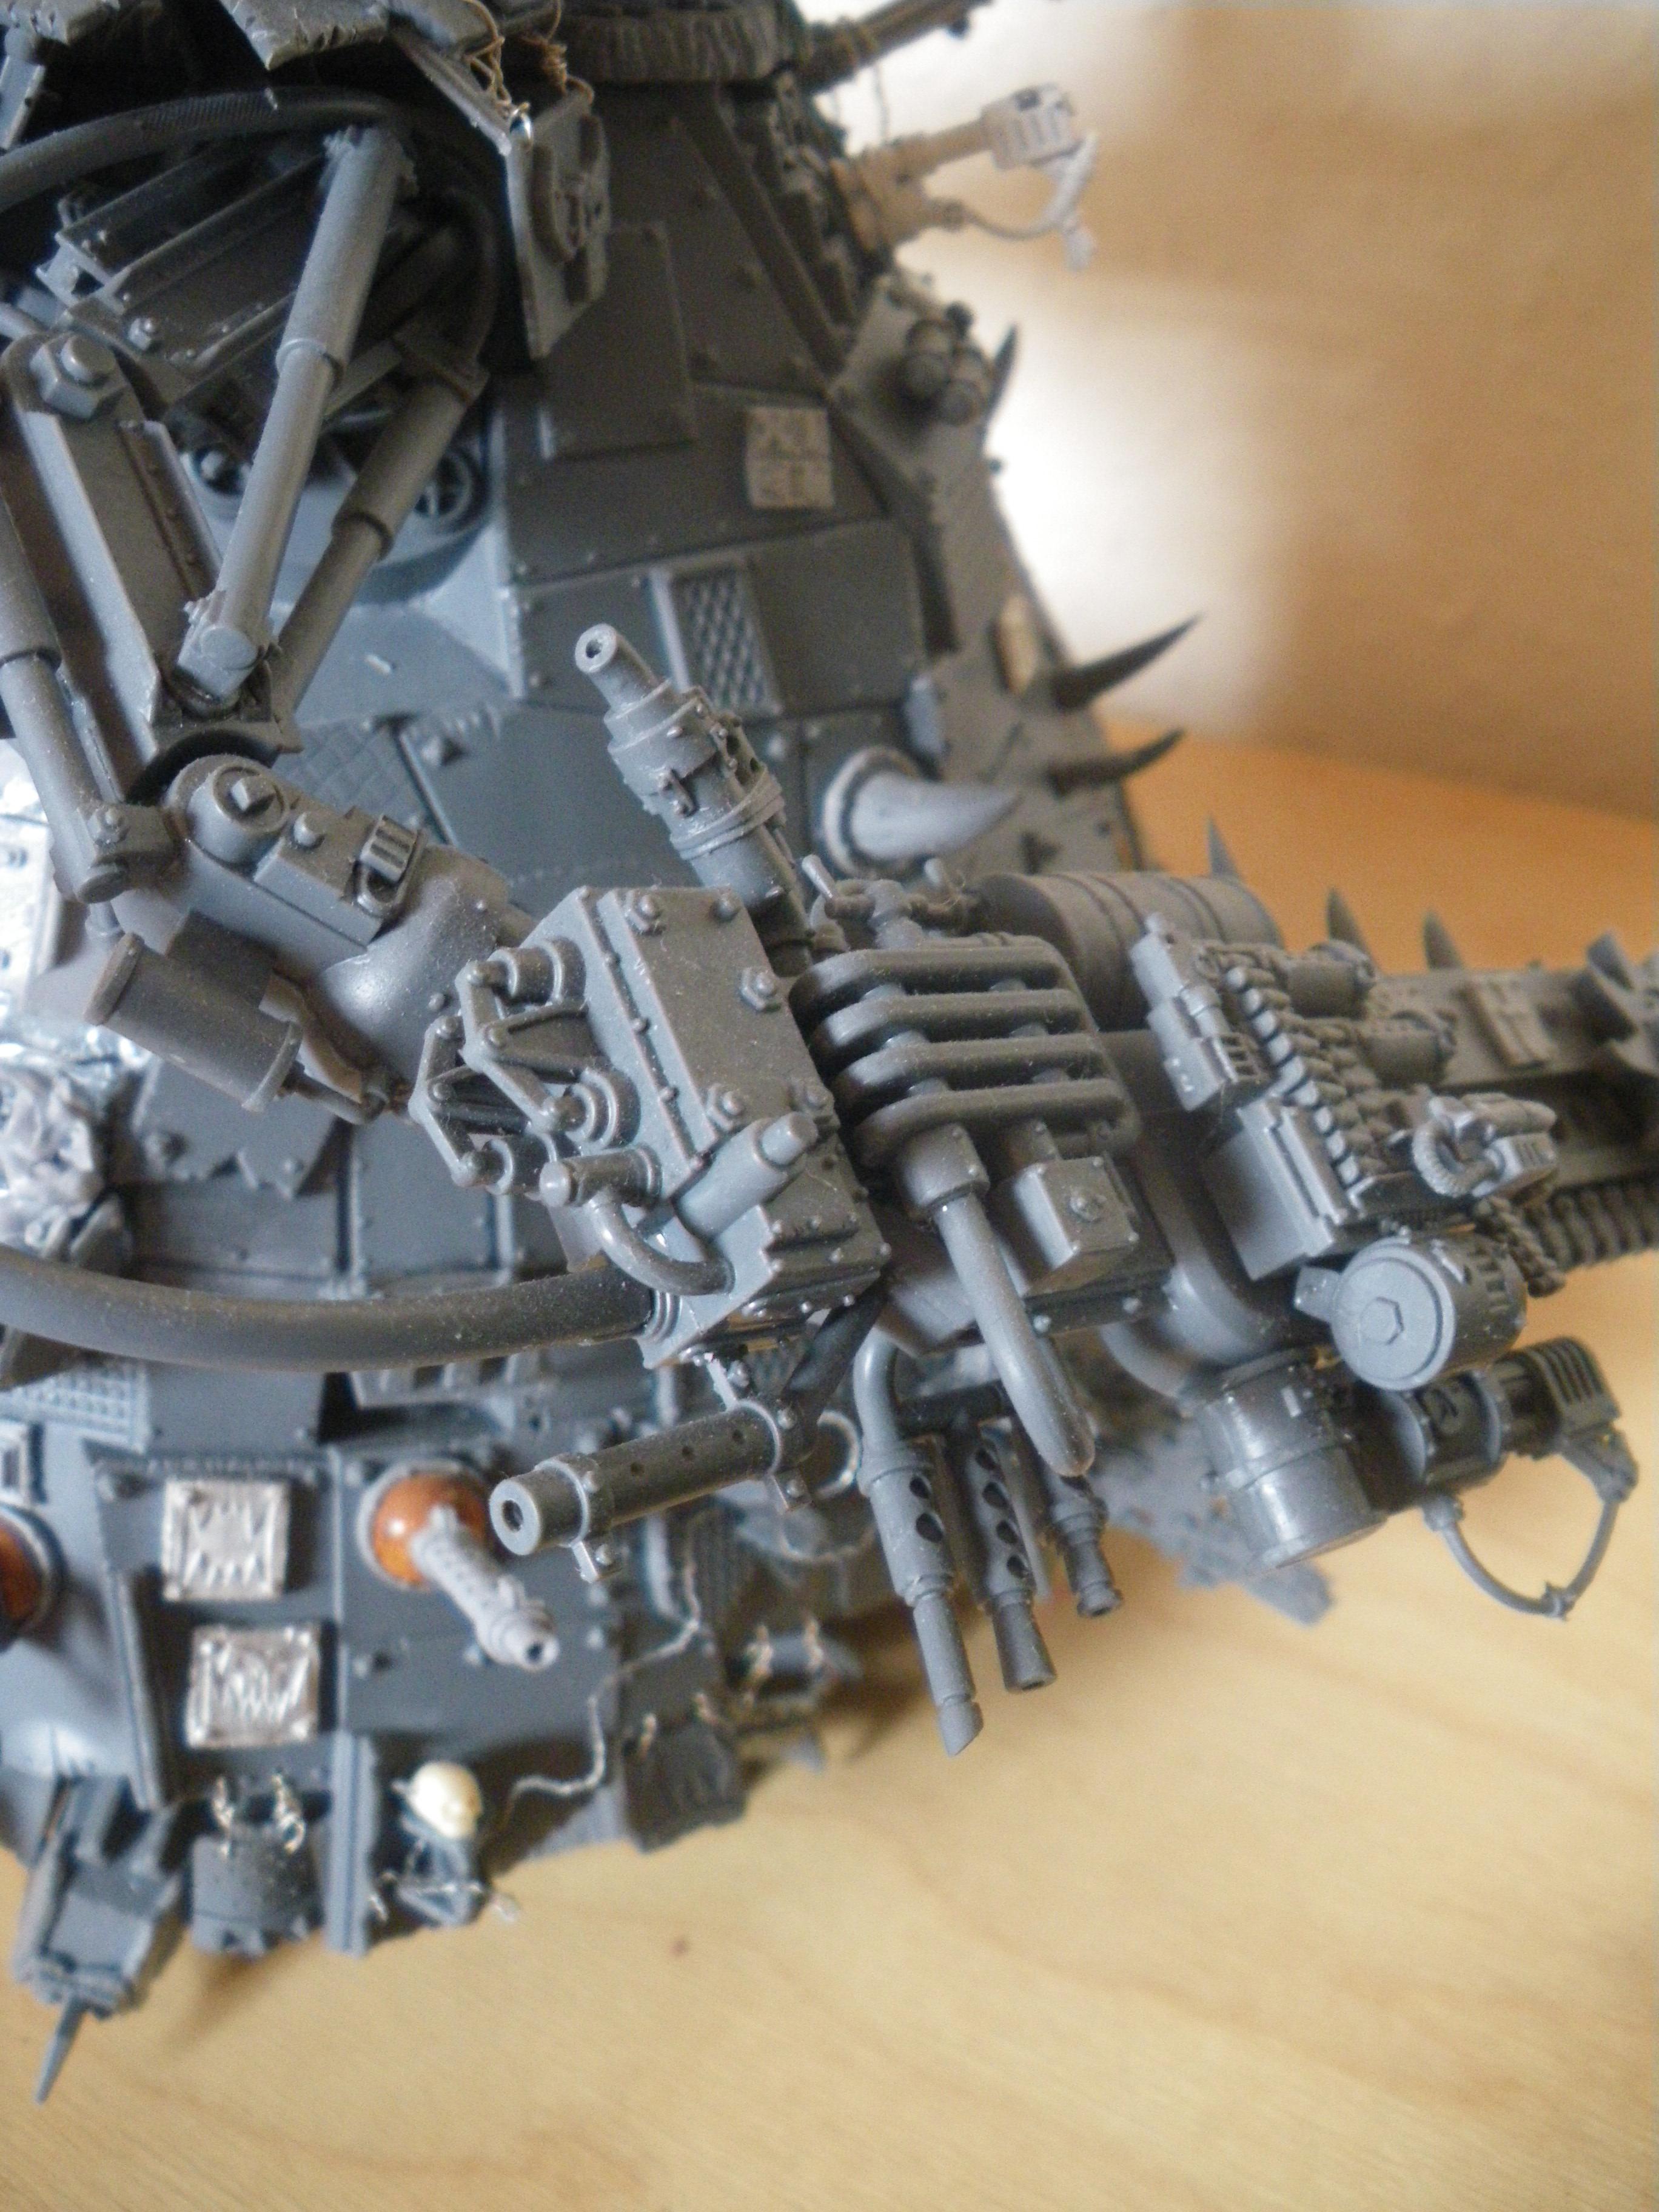 Convershun, Conversion, Grots, Grotz, Orks, Project, Stompa, Work In Progress